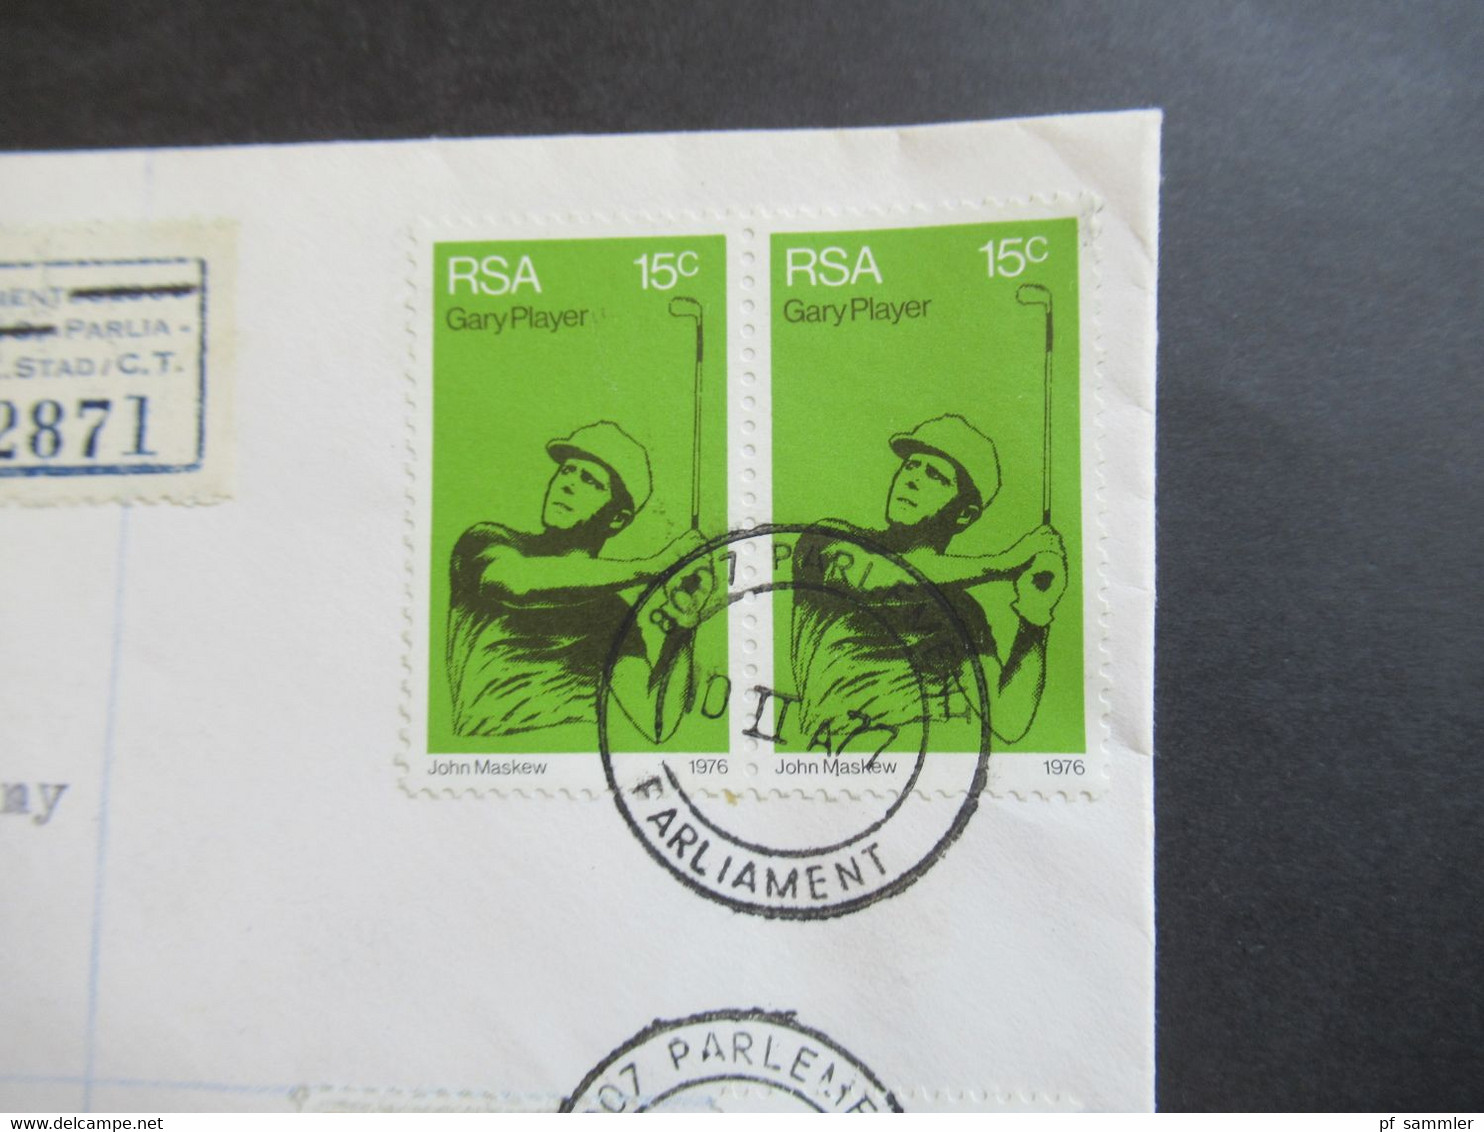 RSA / Süd - Afrika 1977 Air Mail Nach Israel R-Zettel Parlement Parliament K. Stad / Cape Town Volksraad Kaapstad - Covers & Documents